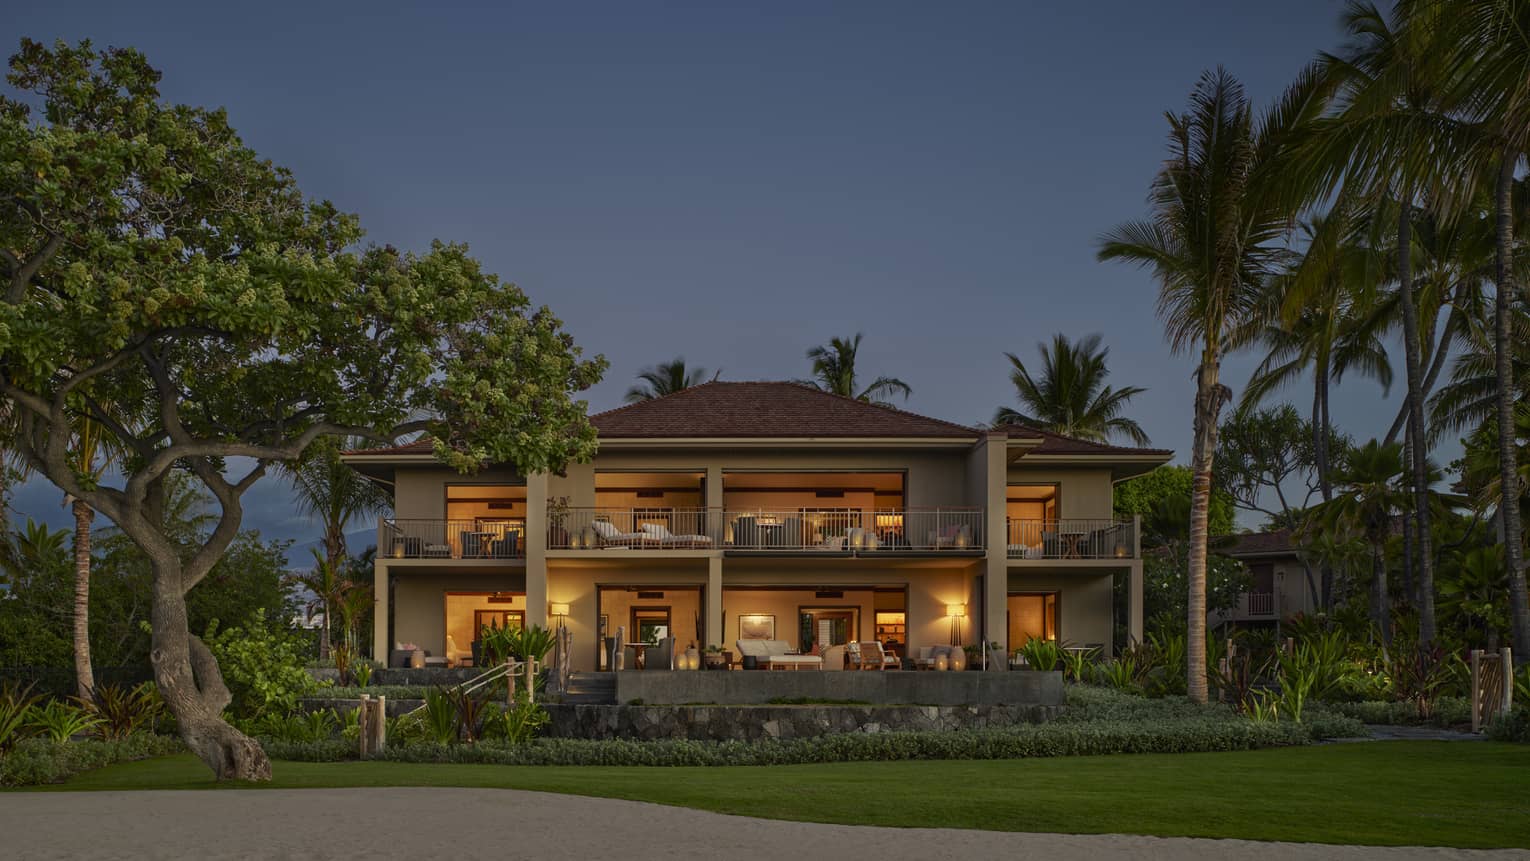 Exterior of large villa with tropical landscaping